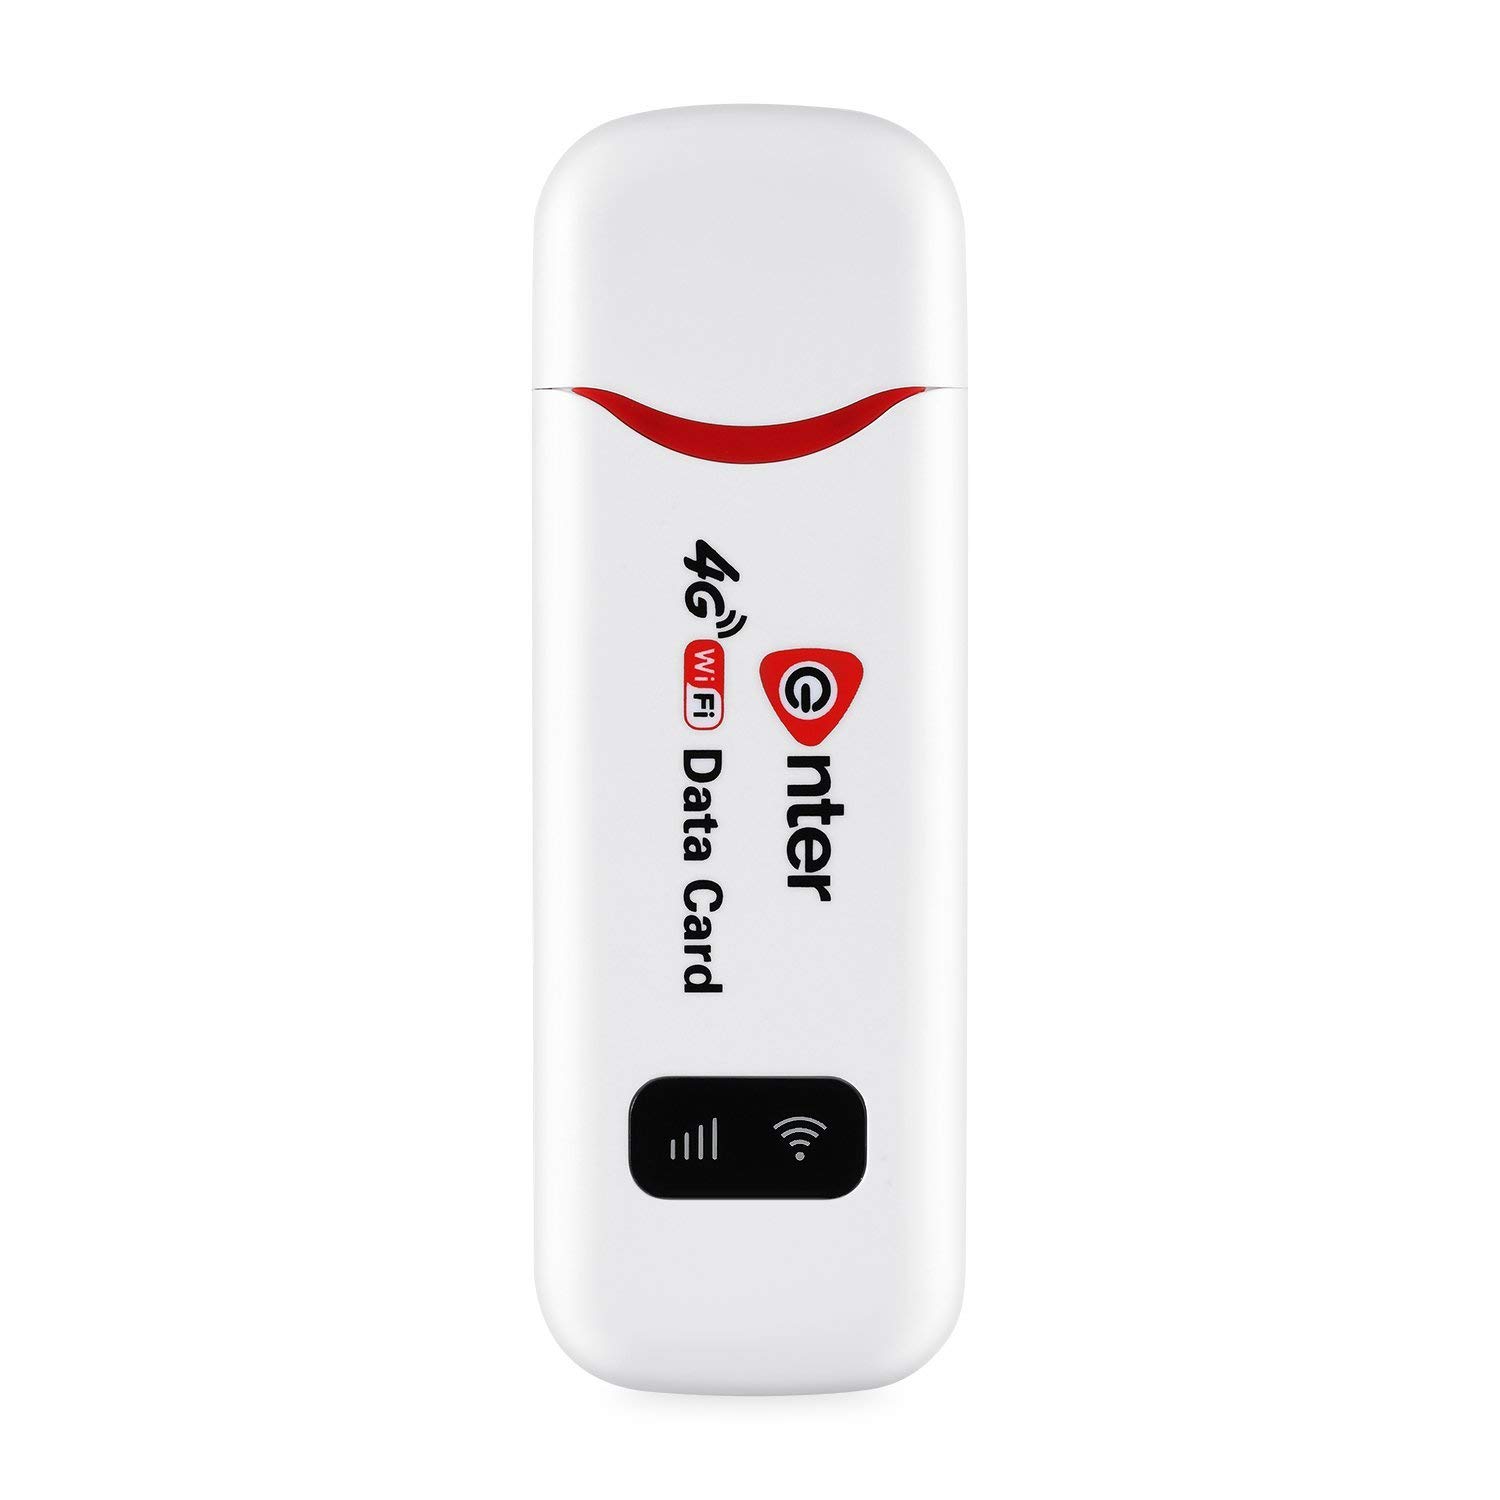 Airtel 3G dongle with connectivity issues